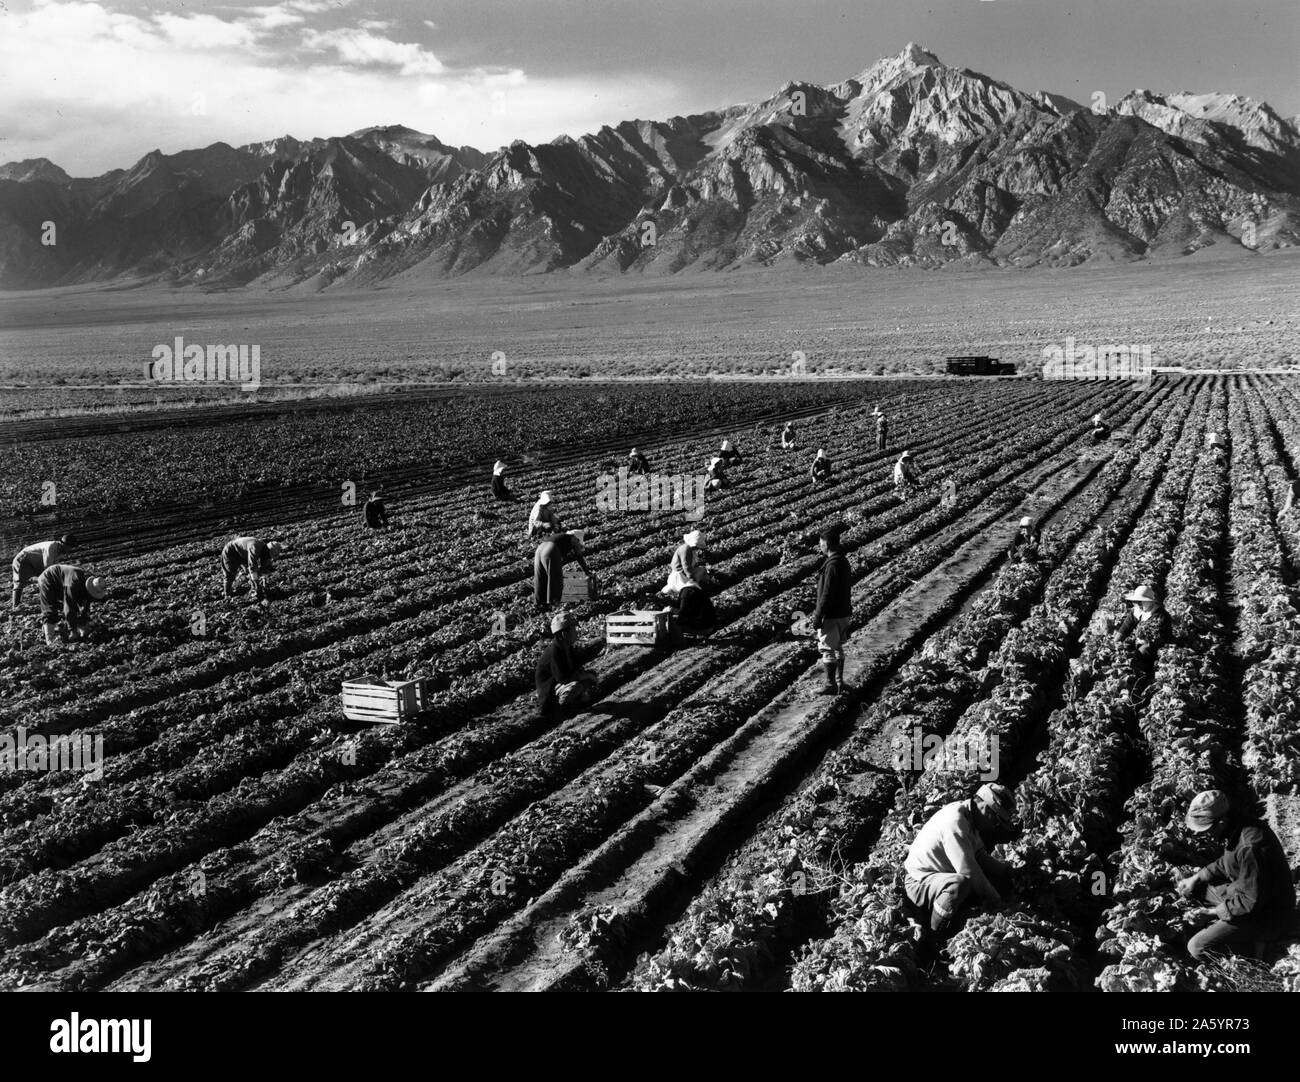 Photographic print of farm workers with Mt. Williamson in the background, Manzanar Relocation Centre. Photographed by Ansel Adams (1902-1984) American photographer and environmentalist, well known for his black and white landscape photographs of the American West, especially Yosemite National Park. Dated 1943 Stock Photo